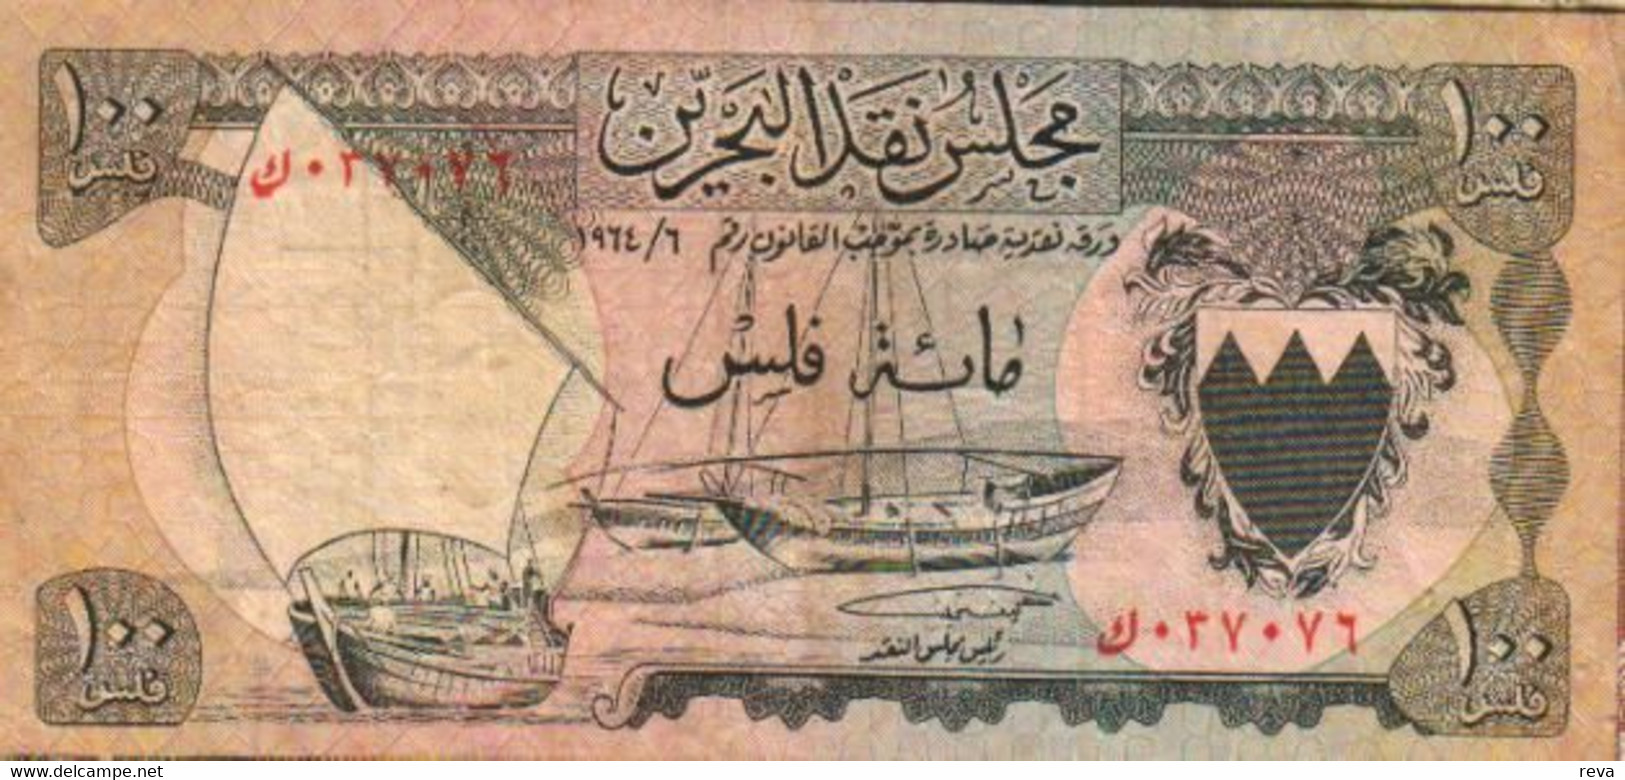 BAHRAIN 100 FILS  BOAT FRONT PALM TREE BACK DATED 1964 VF P.1a 1 YEAR TYPE READ DESCRIPTION CAREFULLY !!! - Bahrain